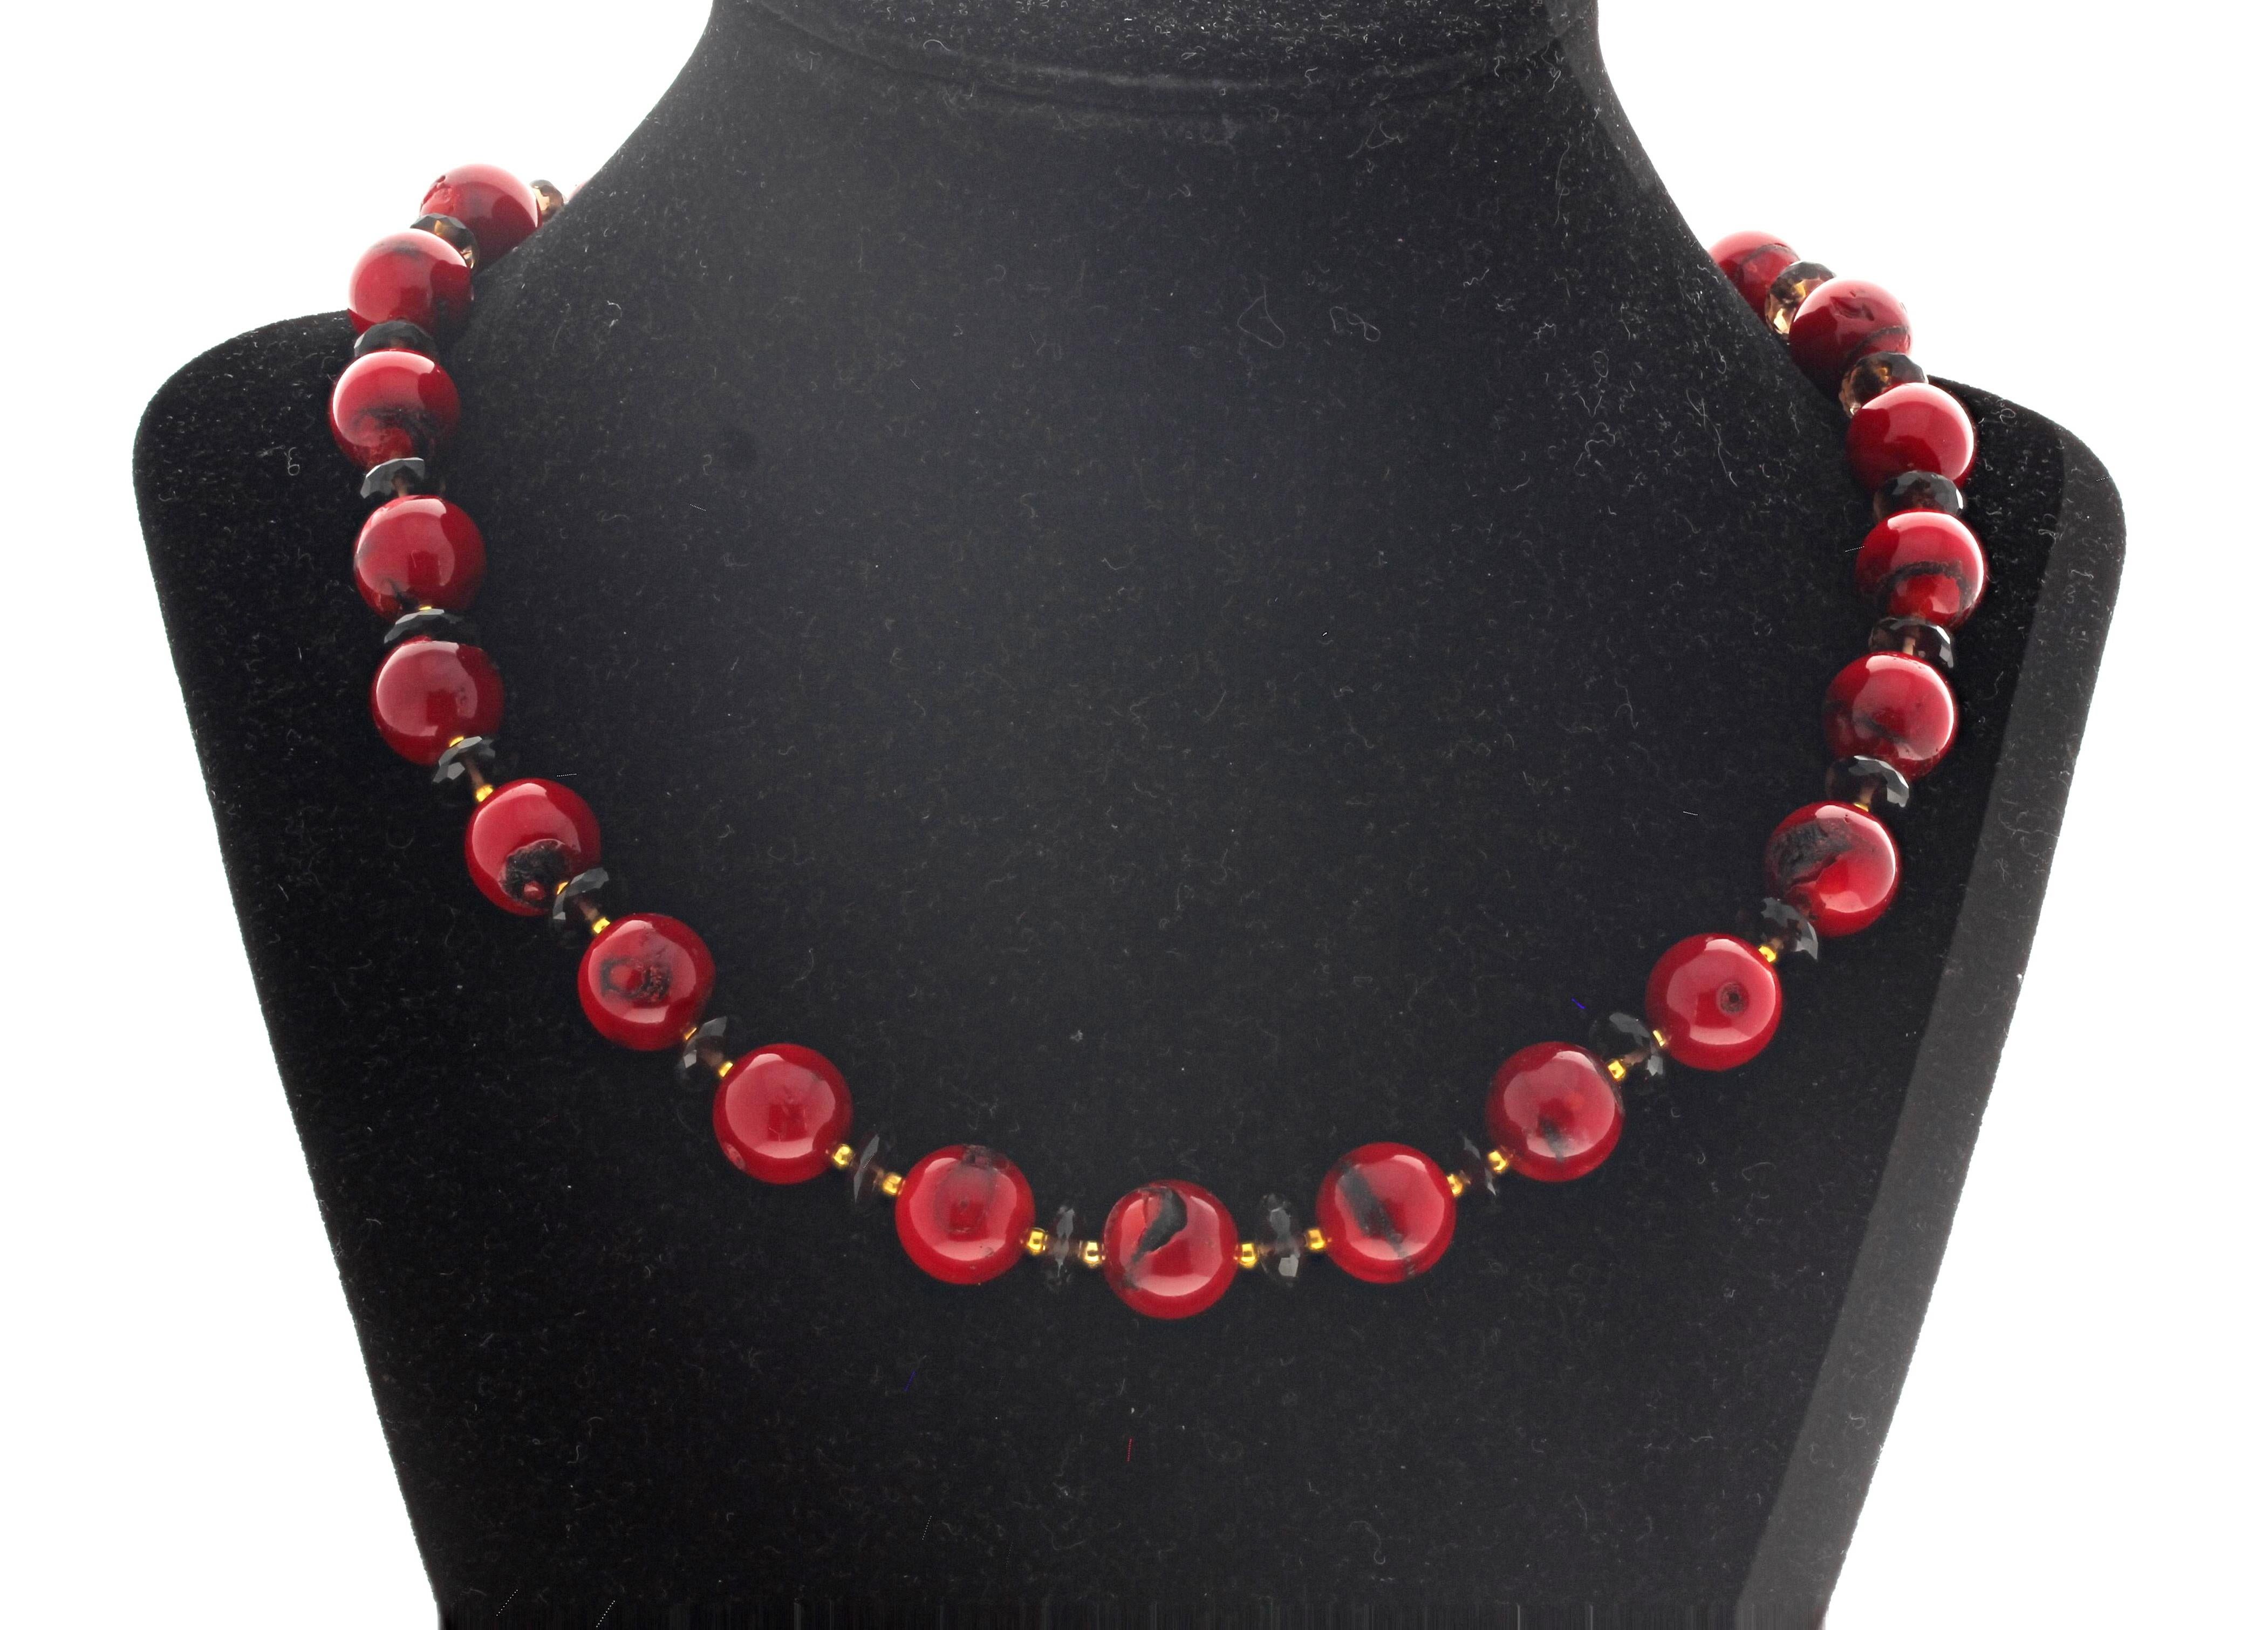 These beautiful little round natural red Coral are enhanced with sparkling gem cut natural real Smoky Quartz and little gold plated rondels.  The Coral are approximately 12mm.  The Smoky Quartz are approximately 8mm,  The goldy plated clasp is an